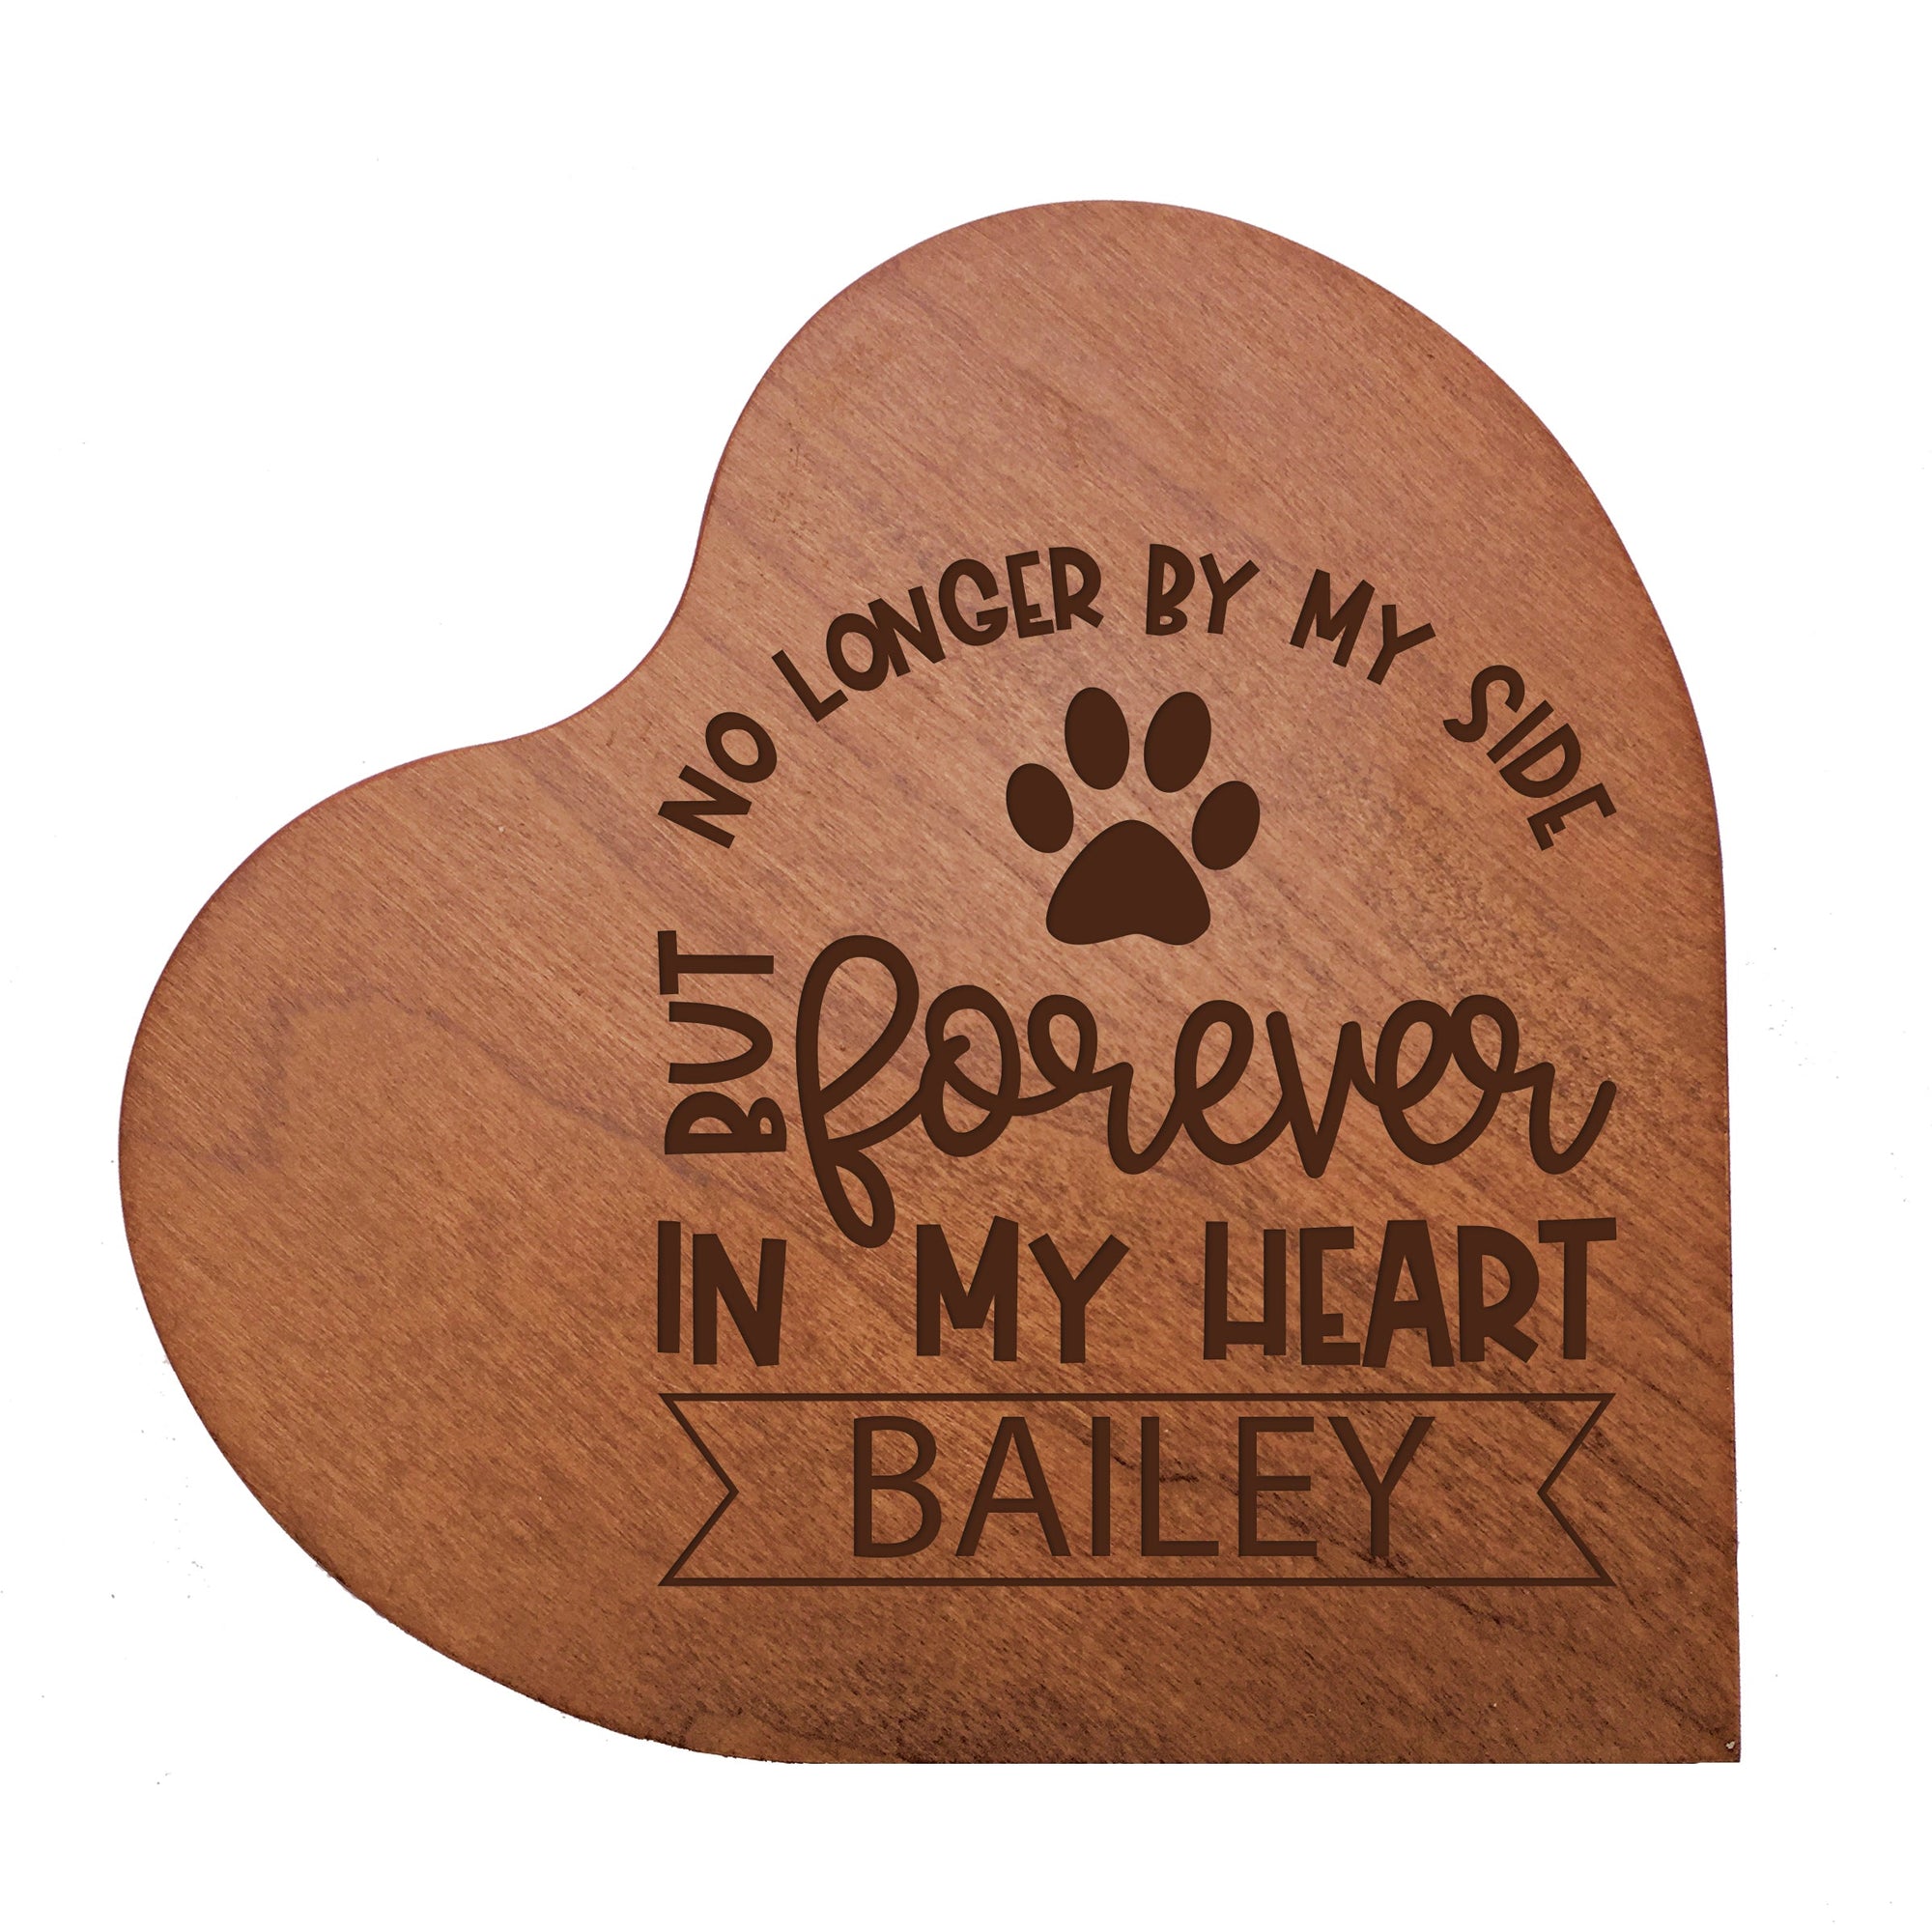 Cherry Pet Memorial Heart Block Decor with phrase "No Longer By My Side"